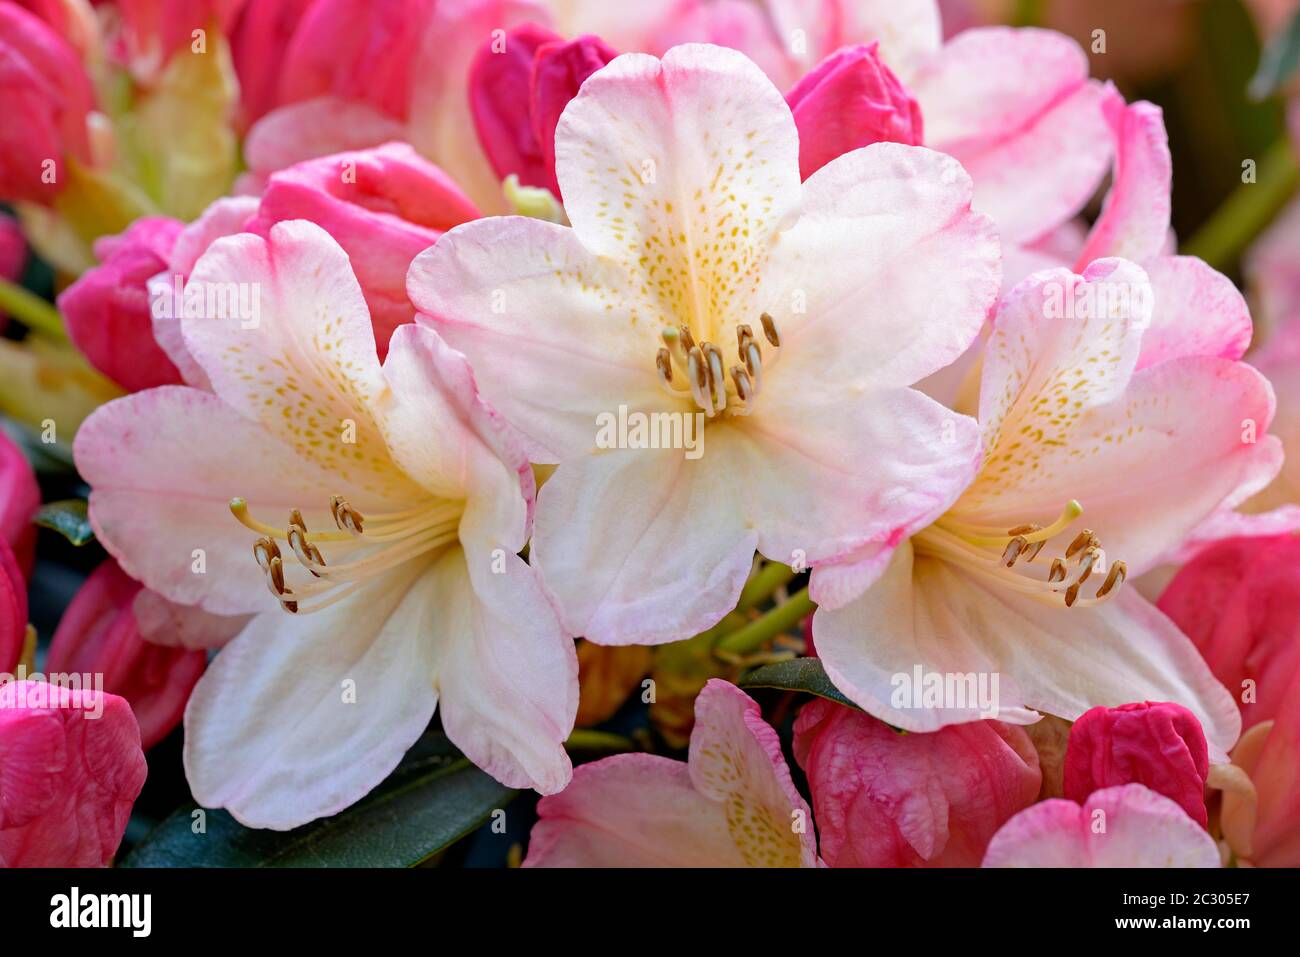 Rhododendron, flower umbel with white and red flowers, North Rhine-Westphalia, Germany Stock Photo